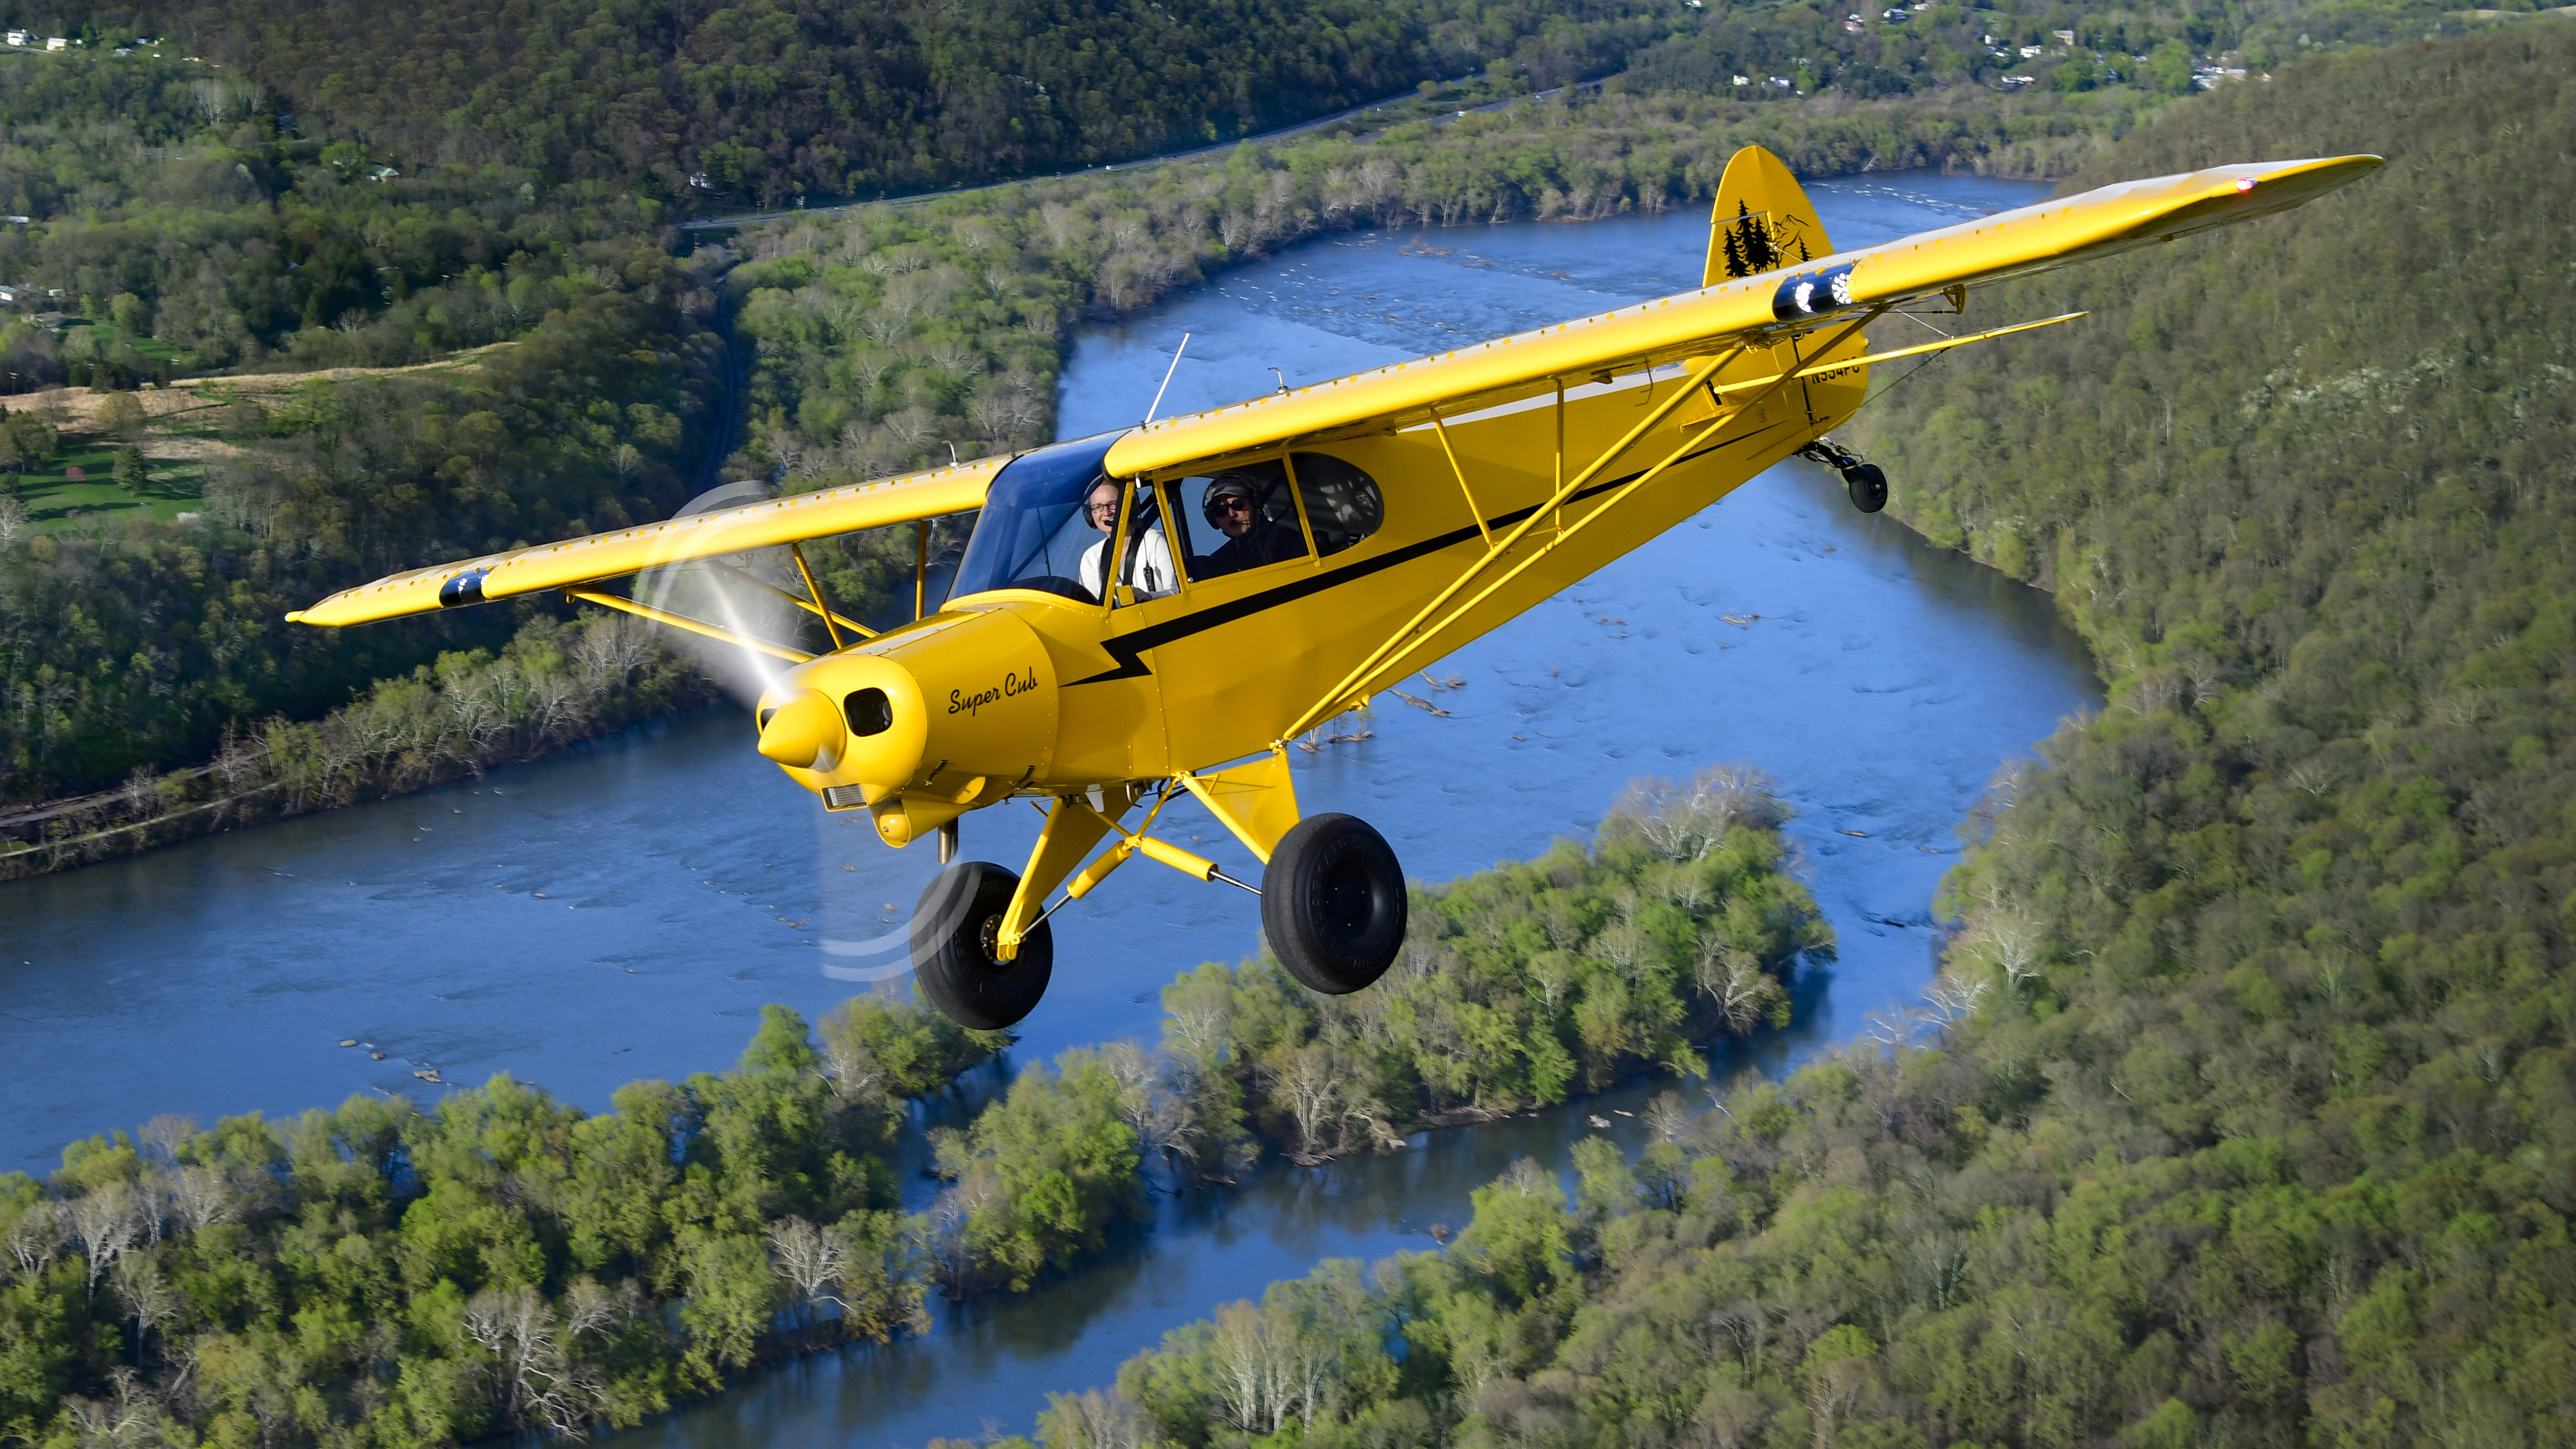 Roger Meggers restored AOPA's Sweepstakes Super Cub.